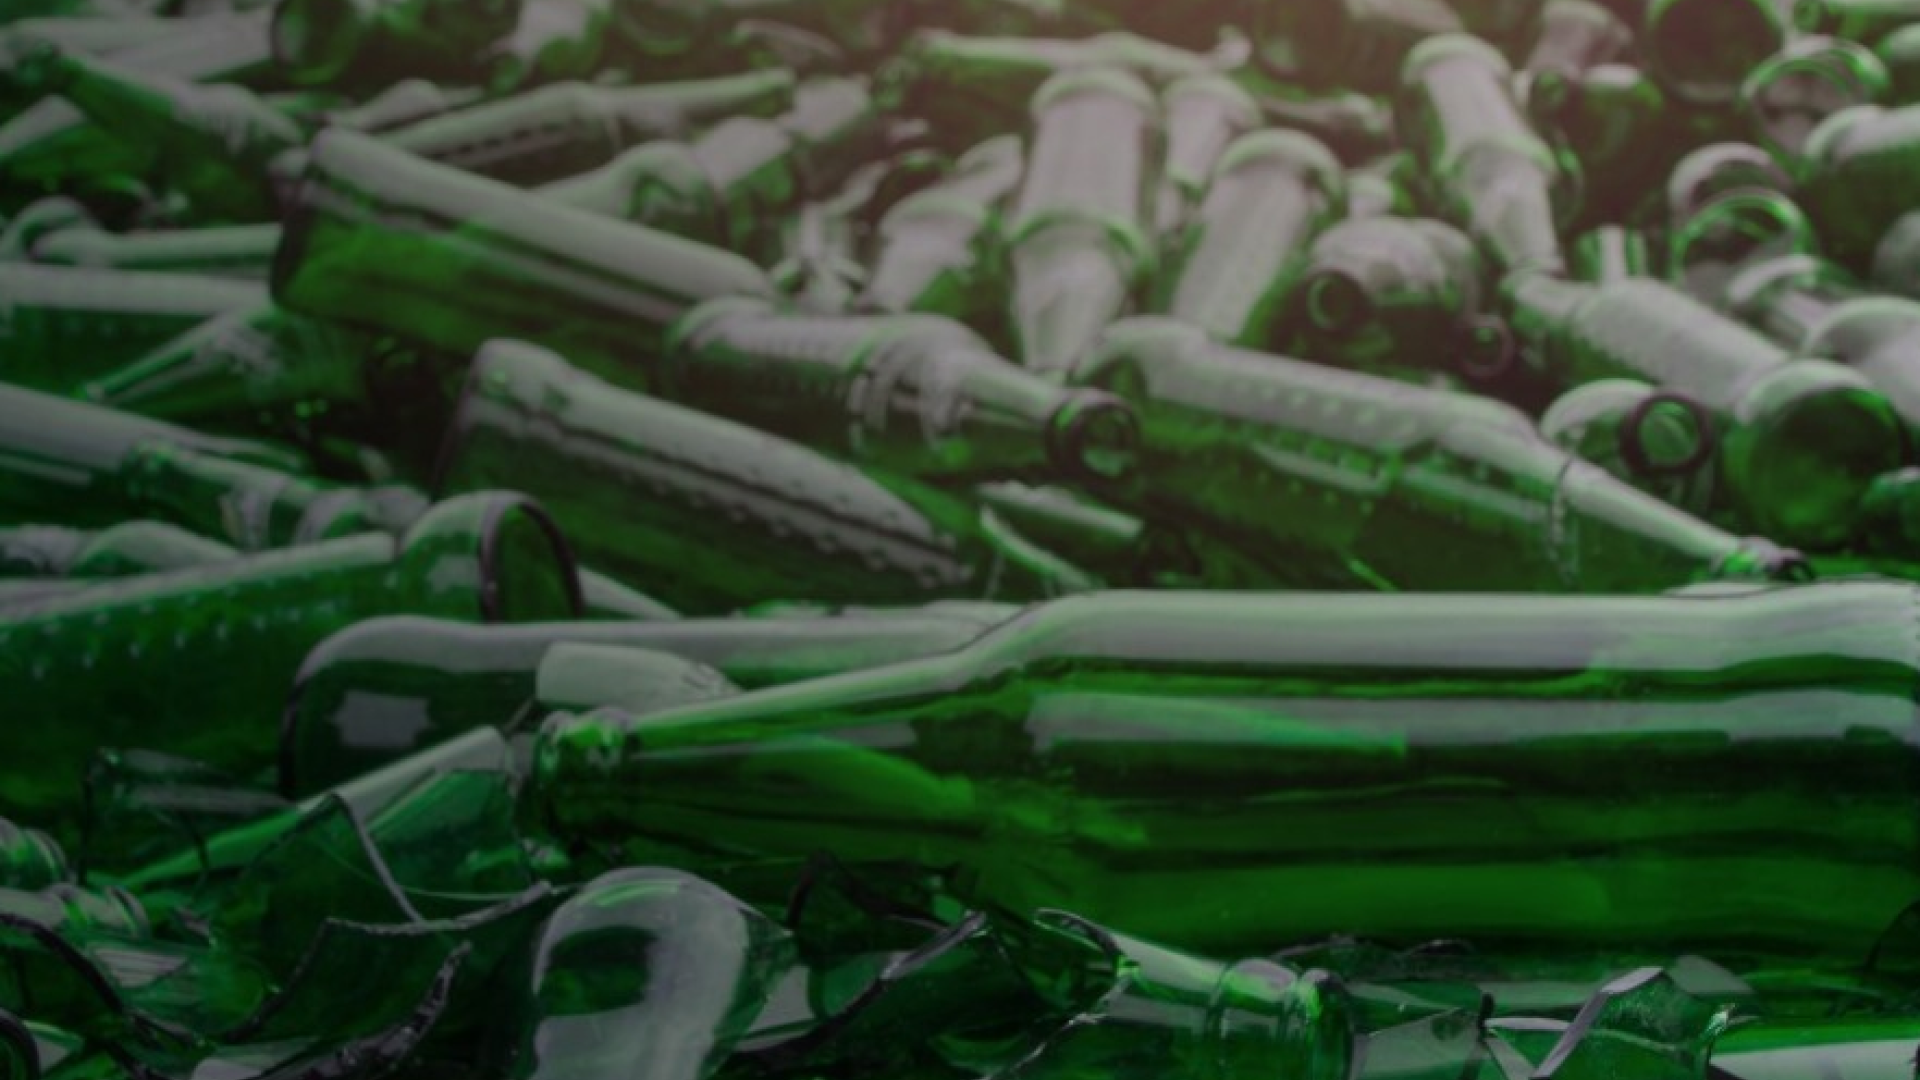 A bunch of green glass bottles waiting to be recycled.